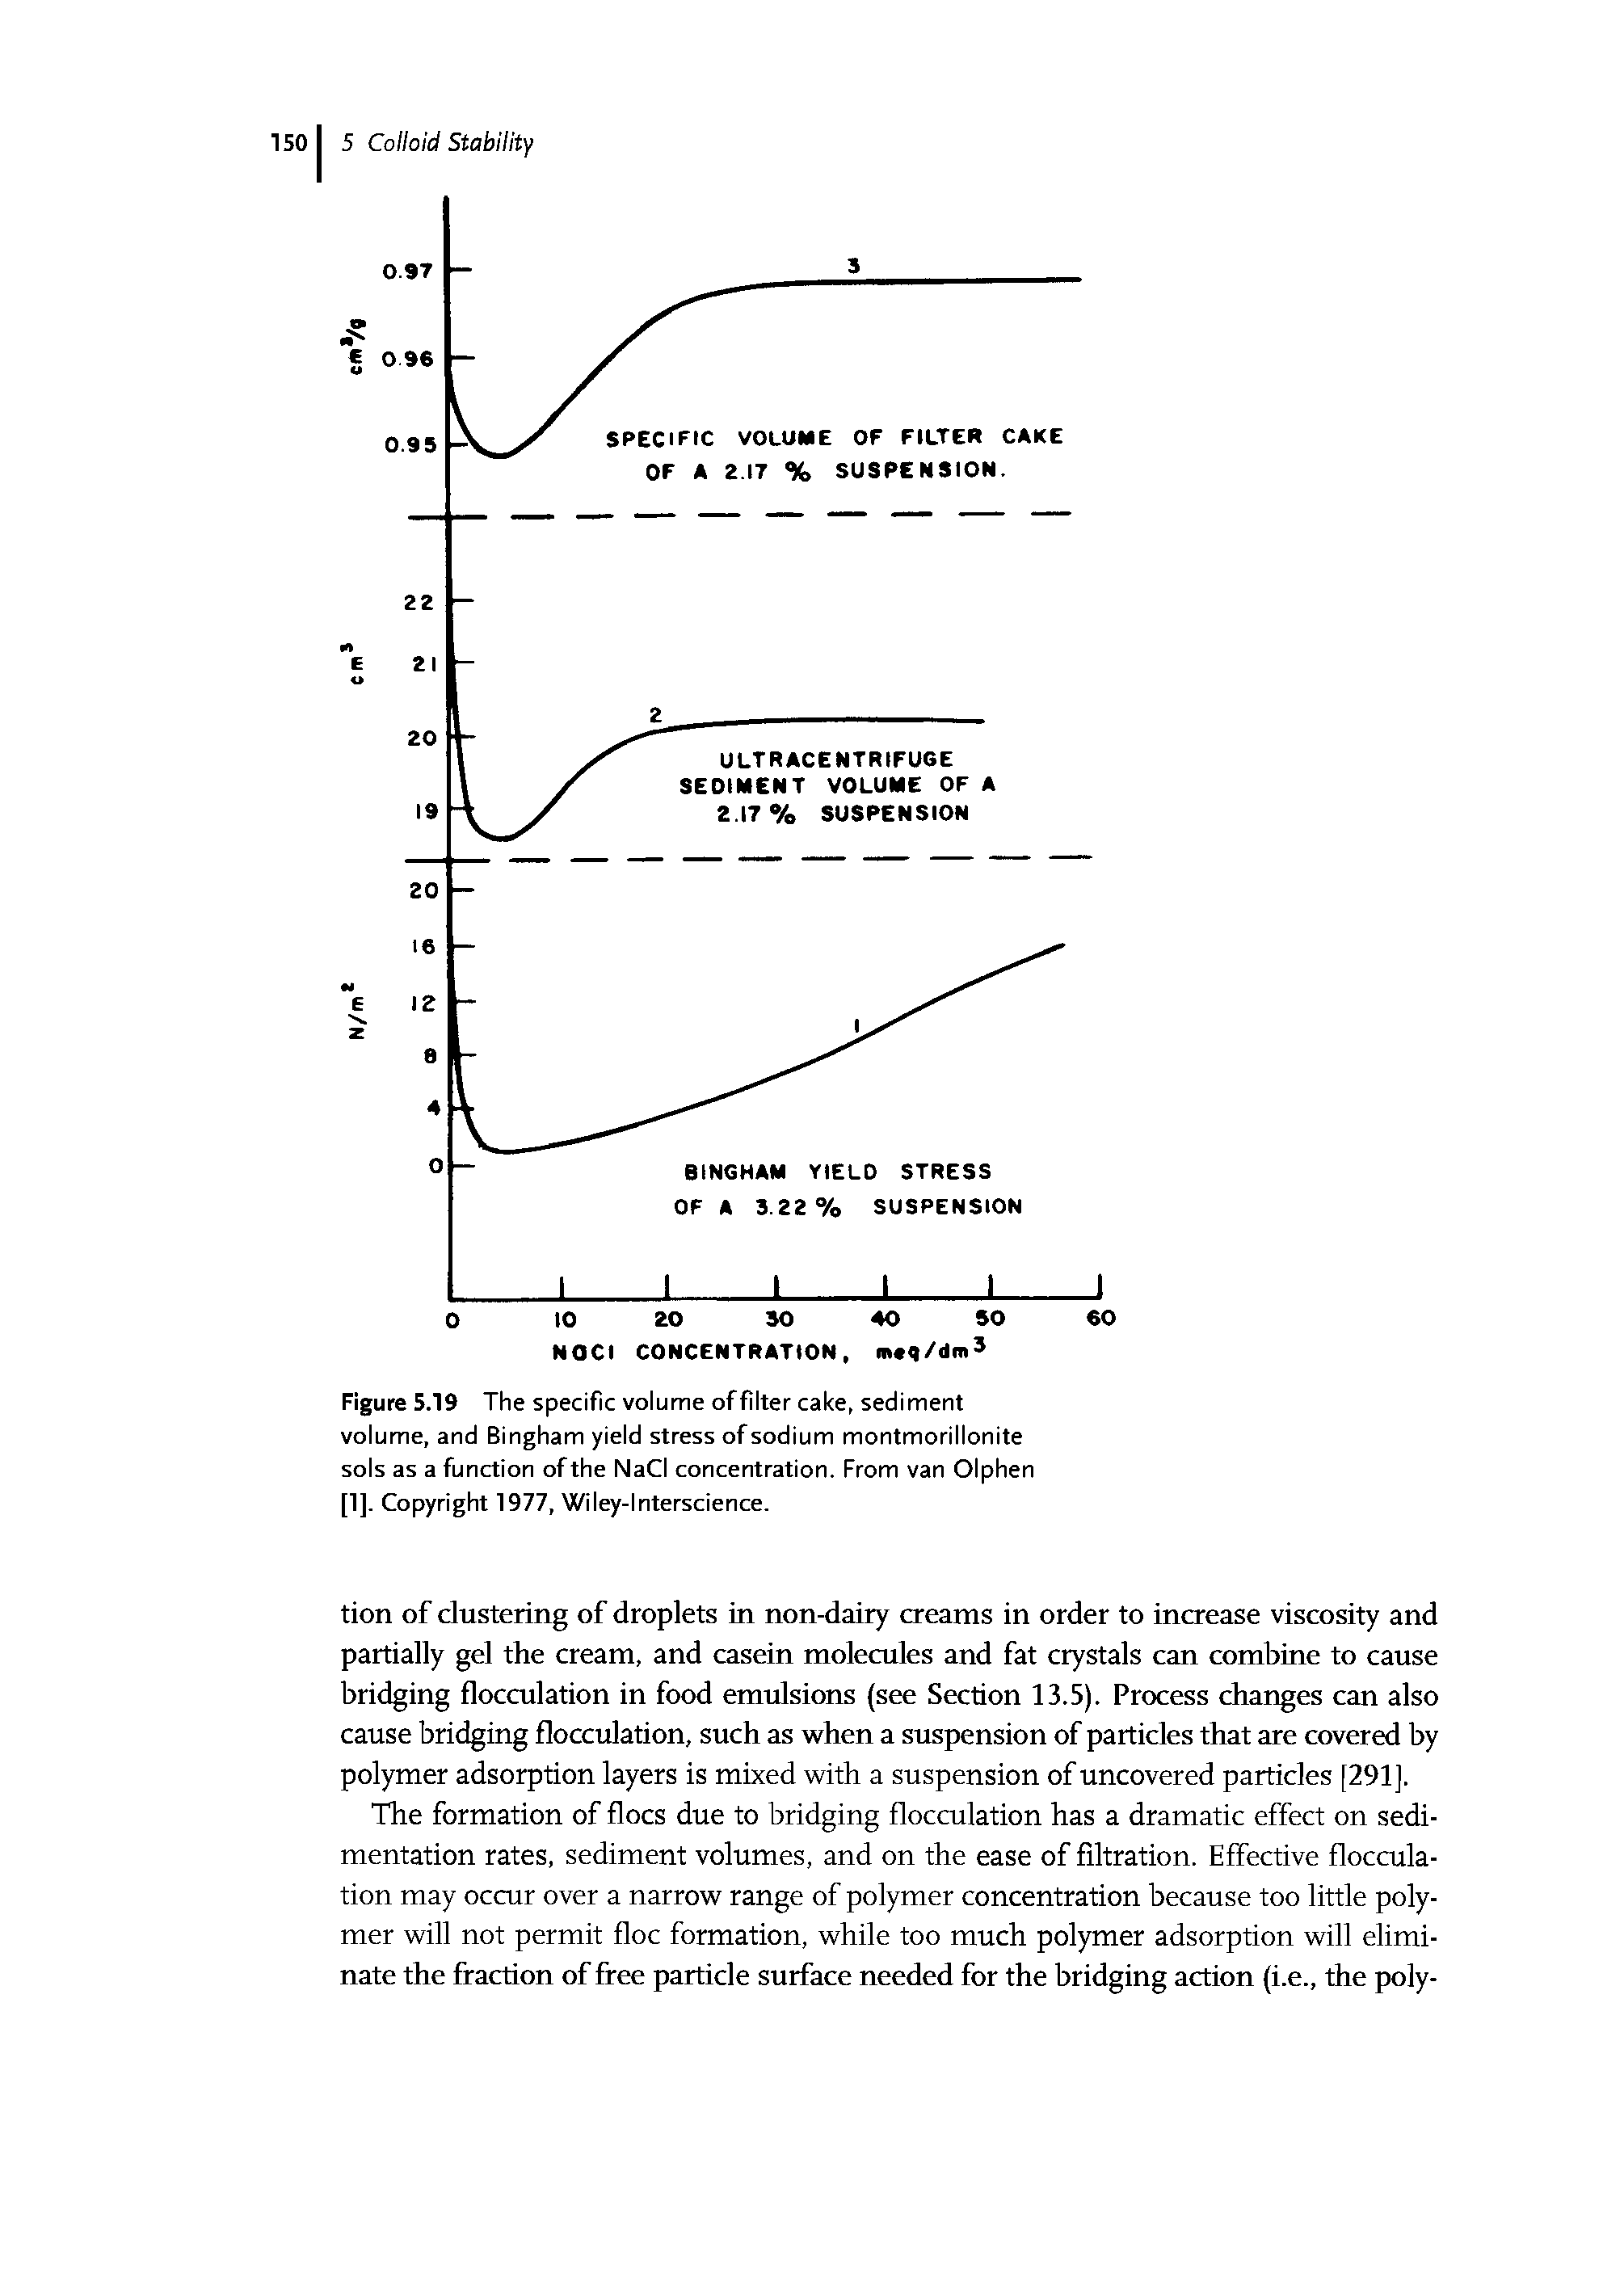 Figure 5.19 The specific volume offilter cake, sediment volume, and Bingham yield stress of sodium montmorillonite sols as a function of the NaCI concentration. From van Olphen [1], Copyright 1977, Wiley-lnterscience.